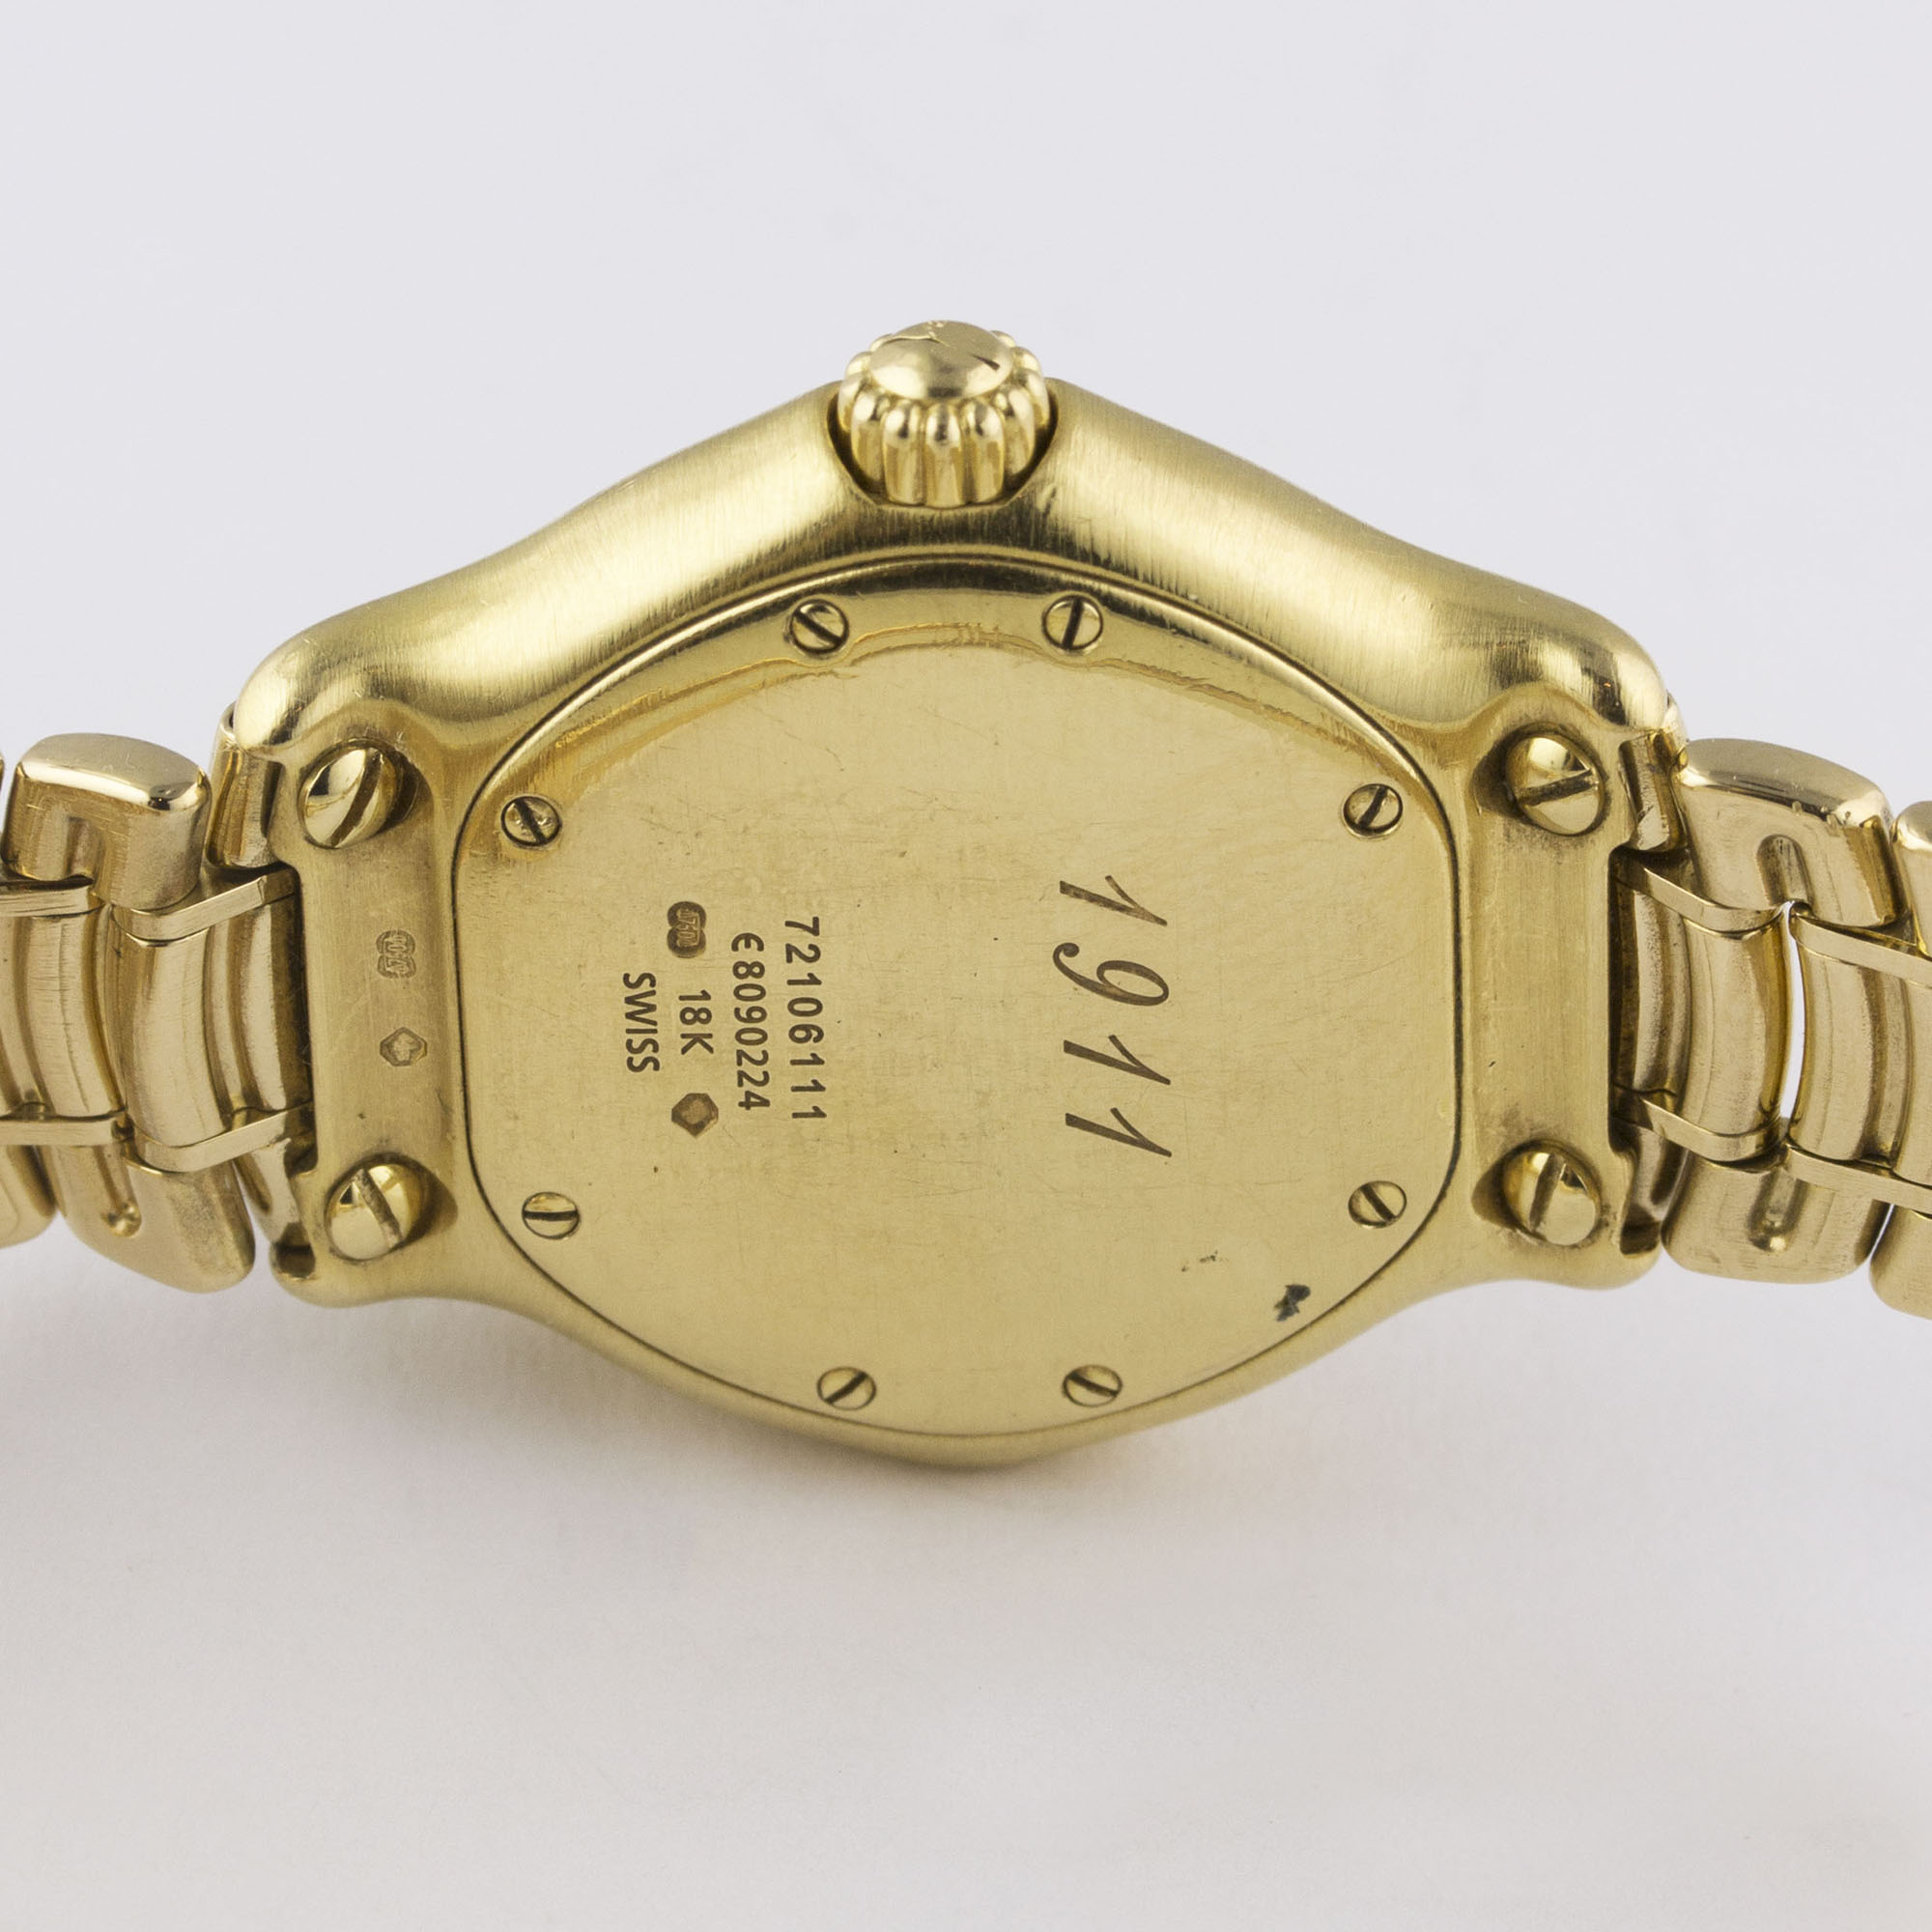 A LADIES 18K SOLID GOLD & DIAMOND EBEL 1911 BRACELET WATCH CIRCA 2000s, REF. E8090224 WITH - Image 6 of 8